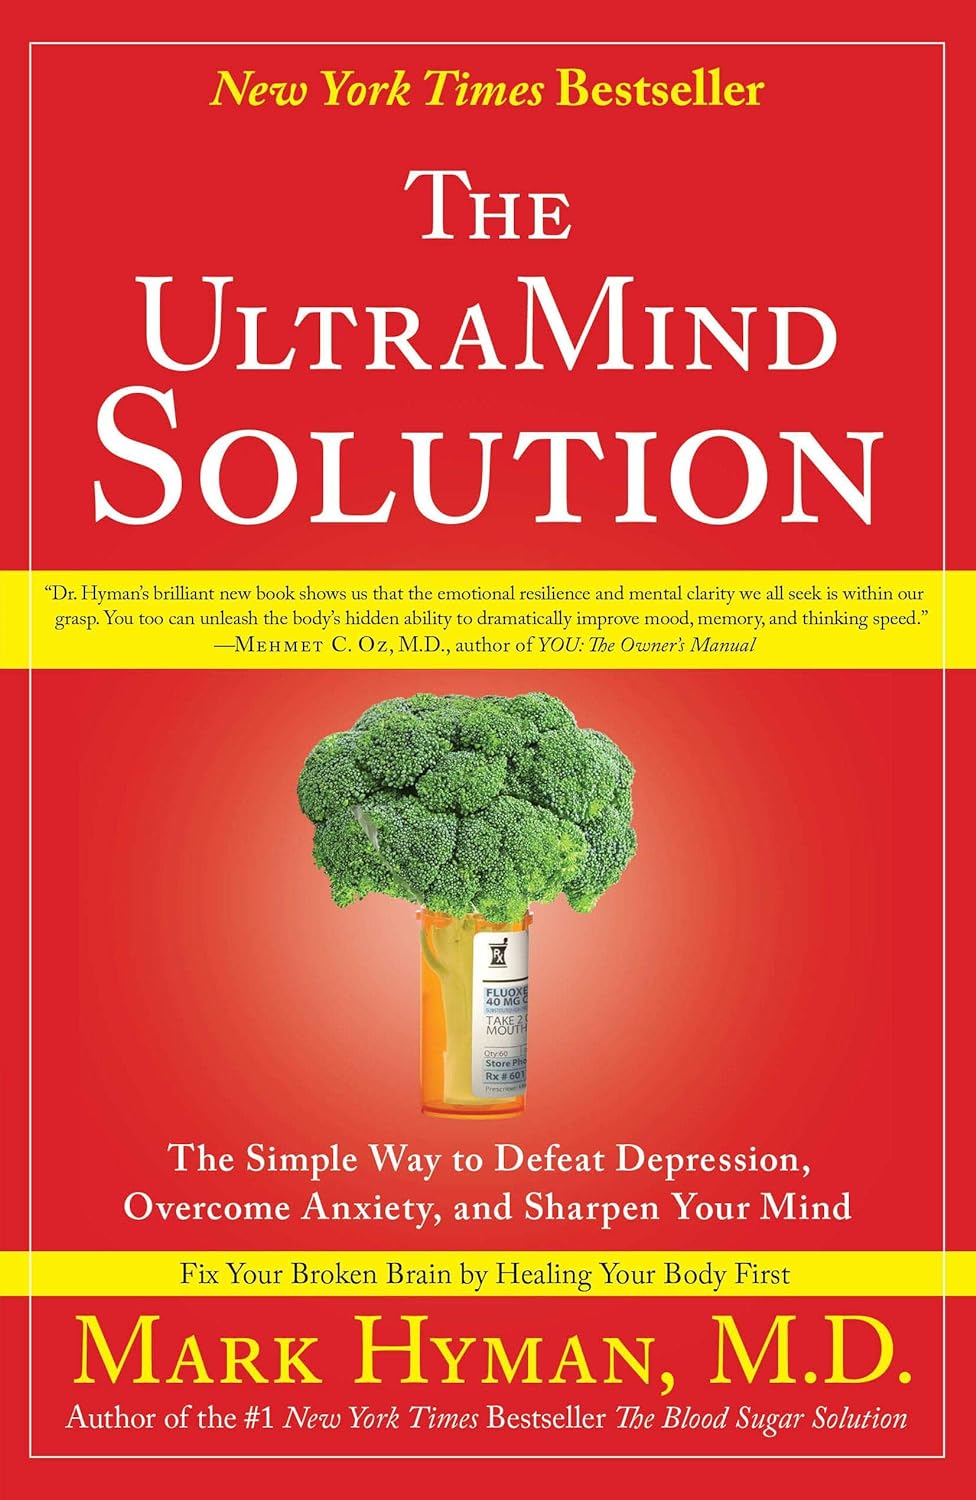 UltraMind Solution Book: Fix Your Broken Brain by Healing Your Body First (Paperback)